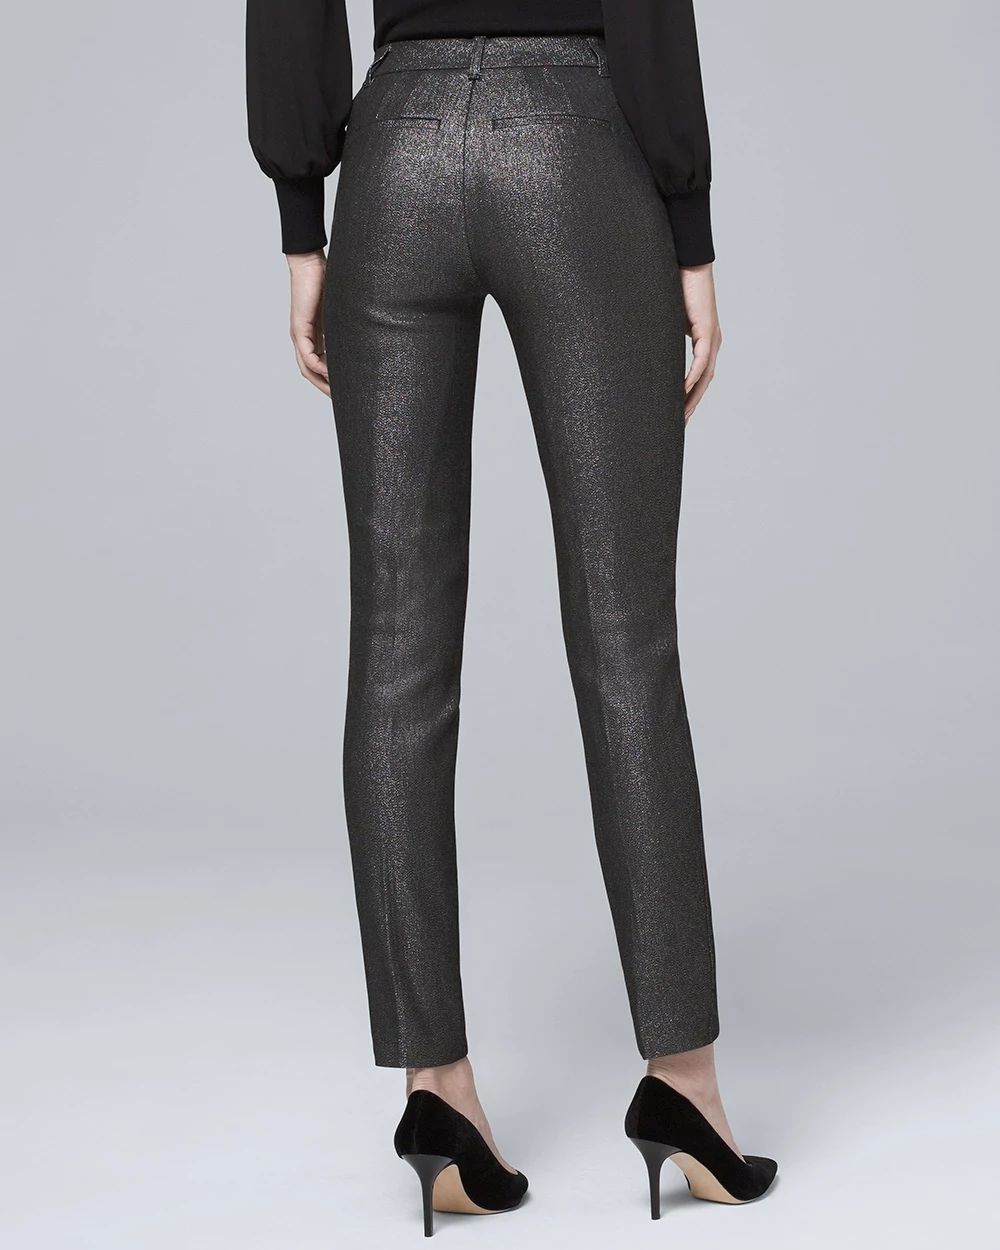 Metallic Slim Ankle Pants click to view larger image.